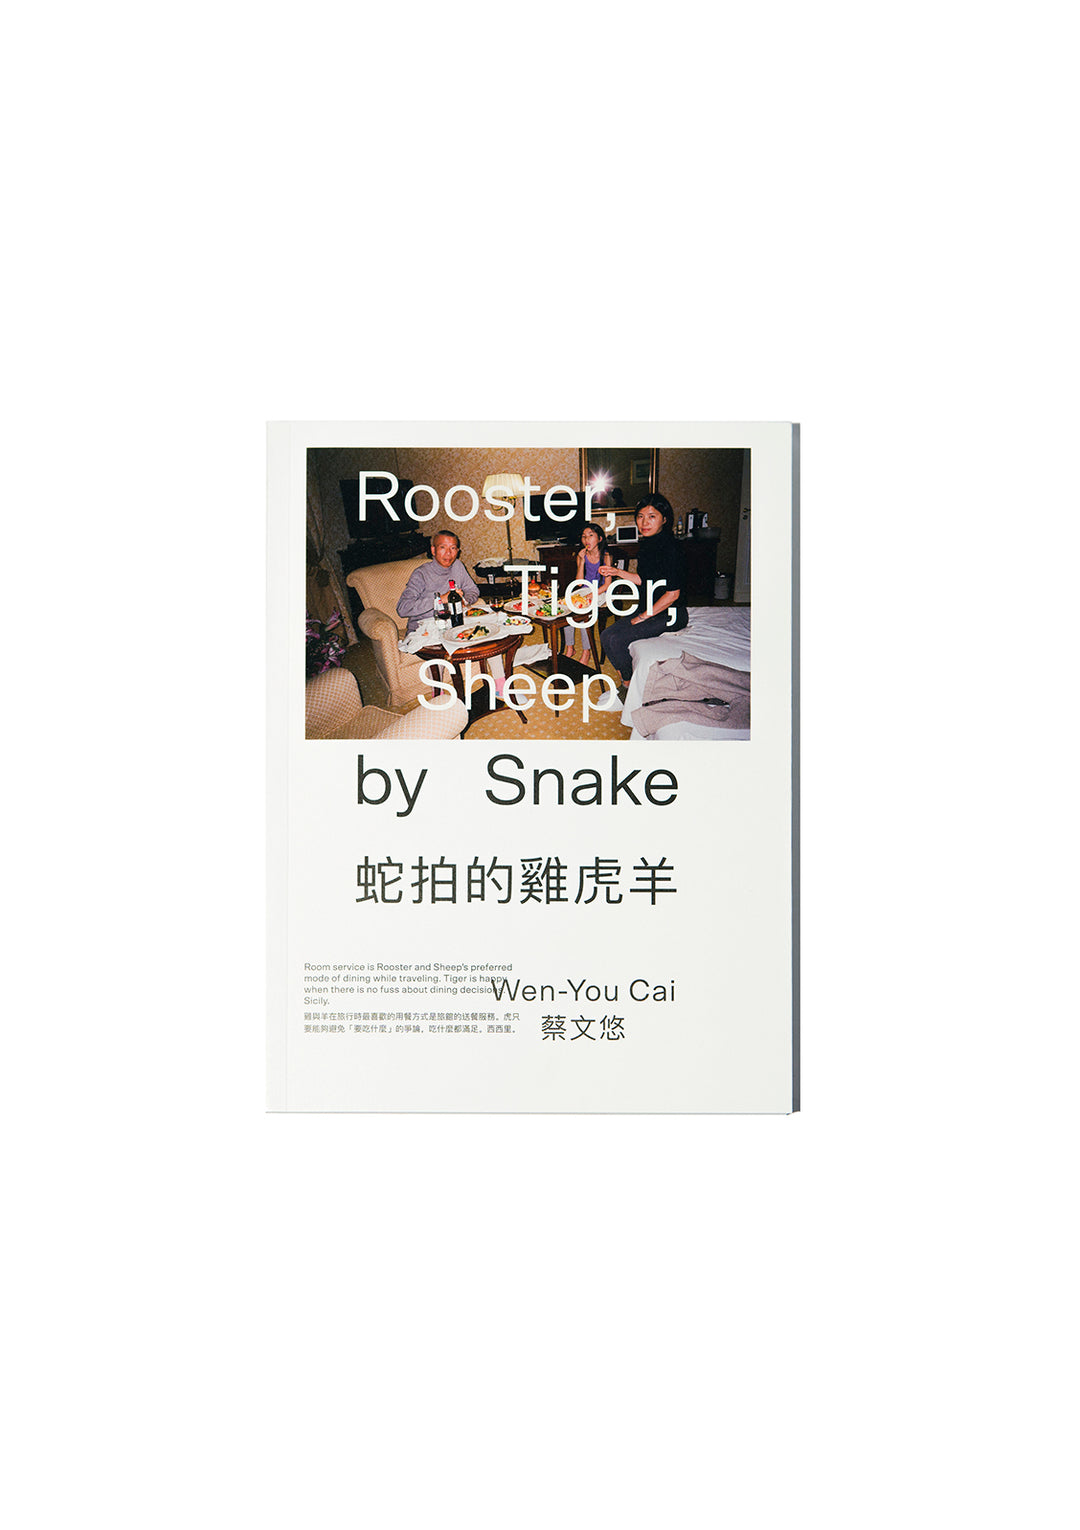 Rooster, Tiger, Sheep by Snake